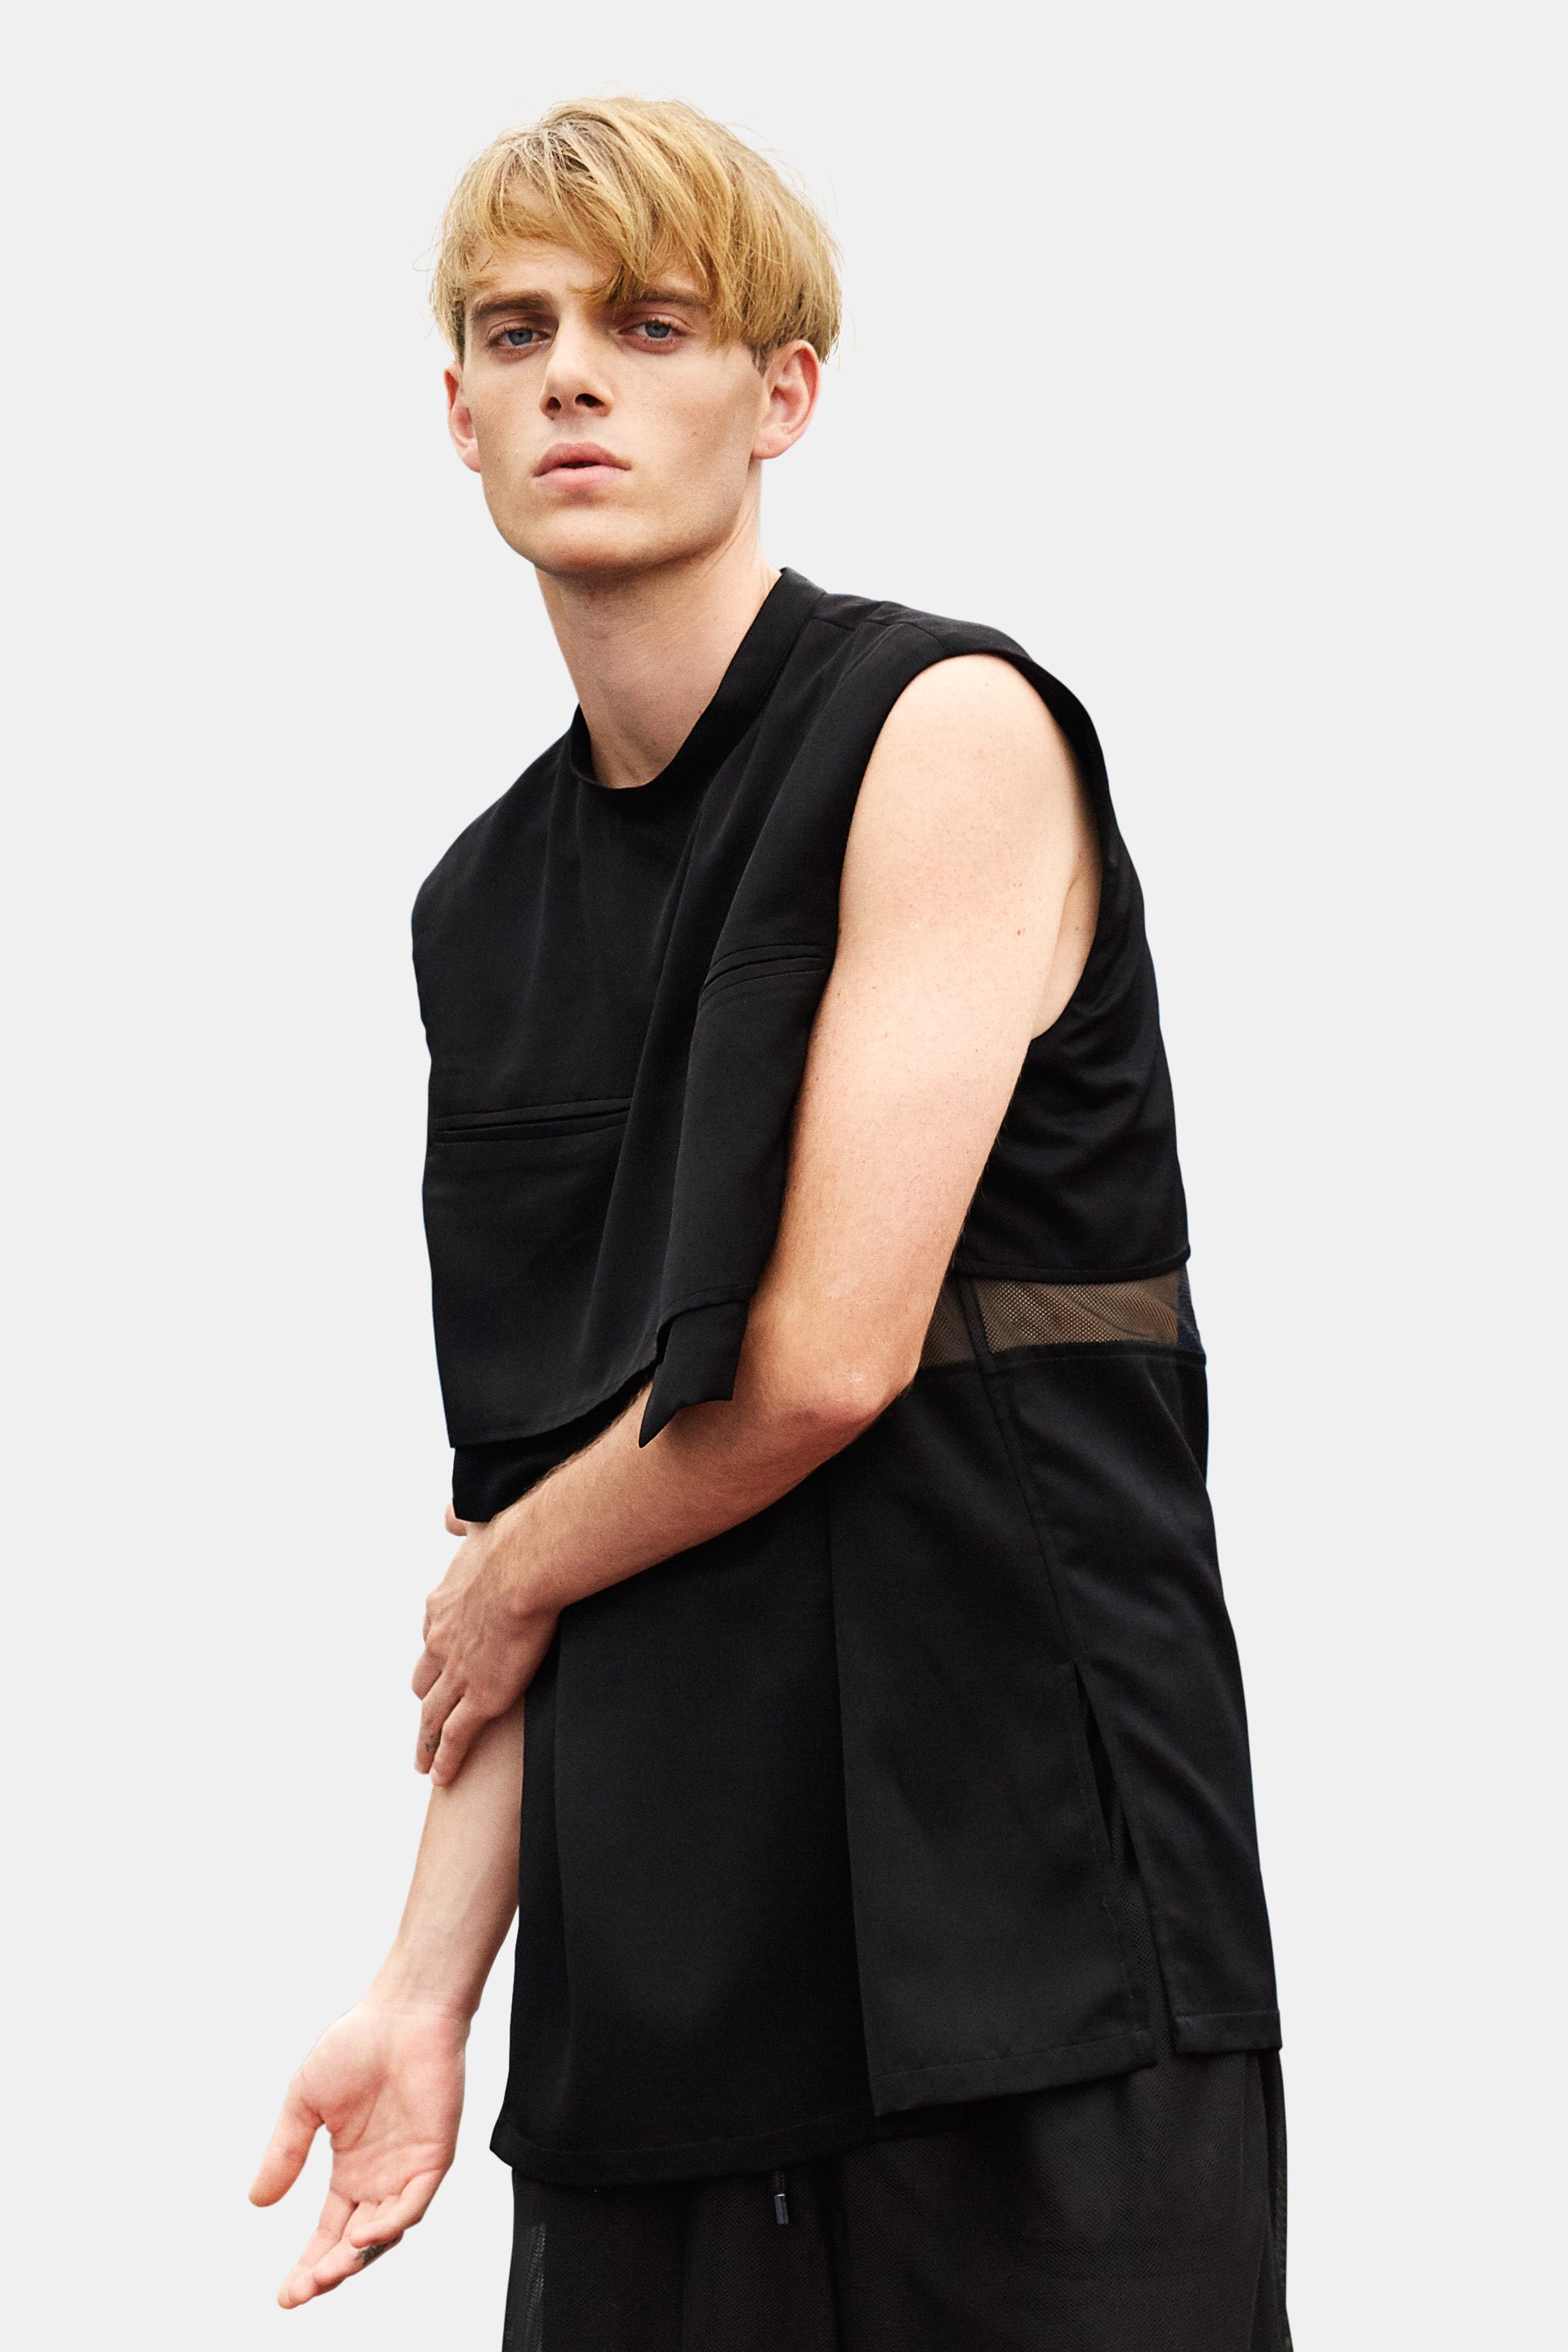 SEANNUNG - MEN- Sleeveless T-shirt with Double Pockets 雙口袋背心 